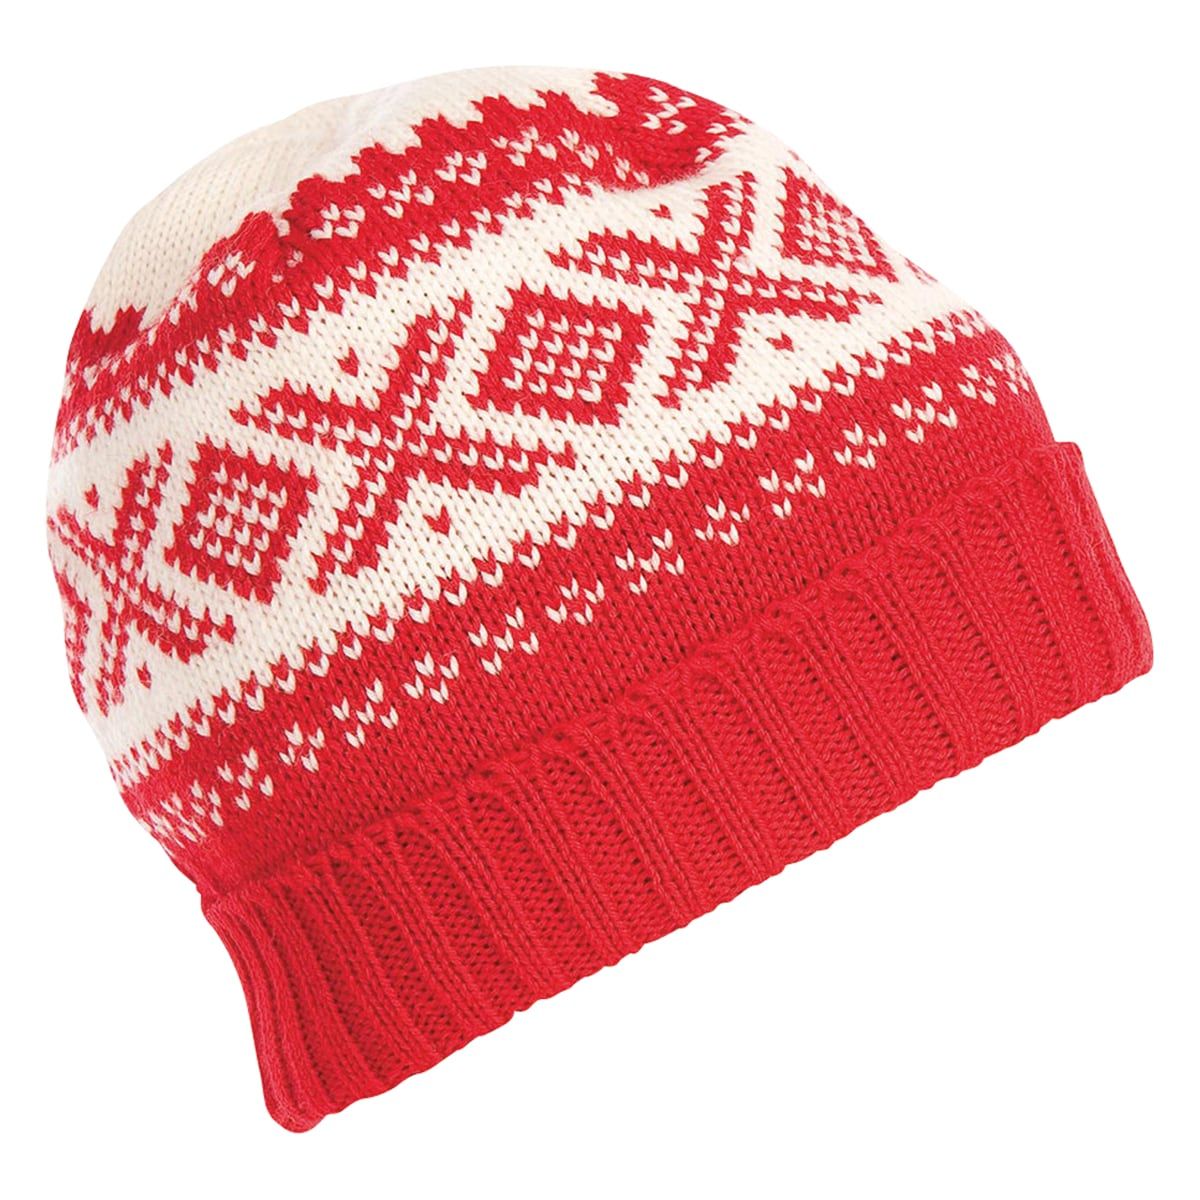 Dale of Norway Cortina 1956 Hat Raspberry/Offwhite